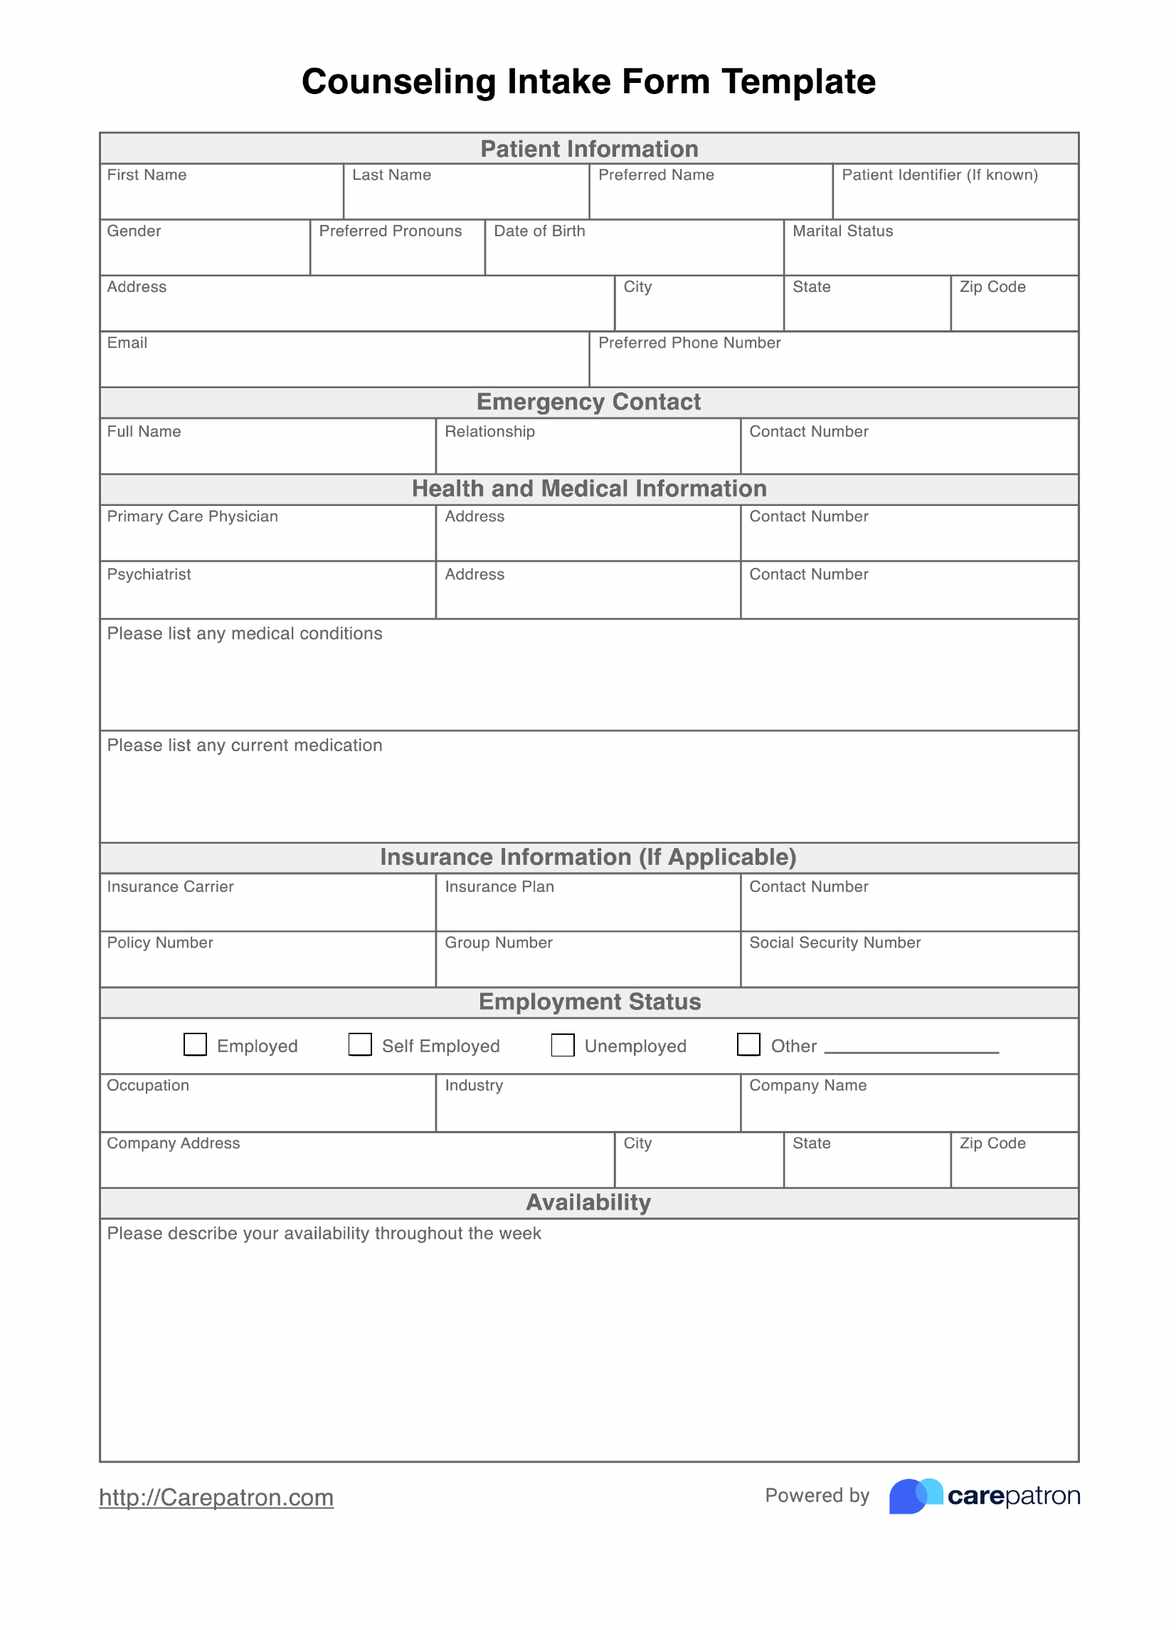 Counseling Intake Form Template PDF Example